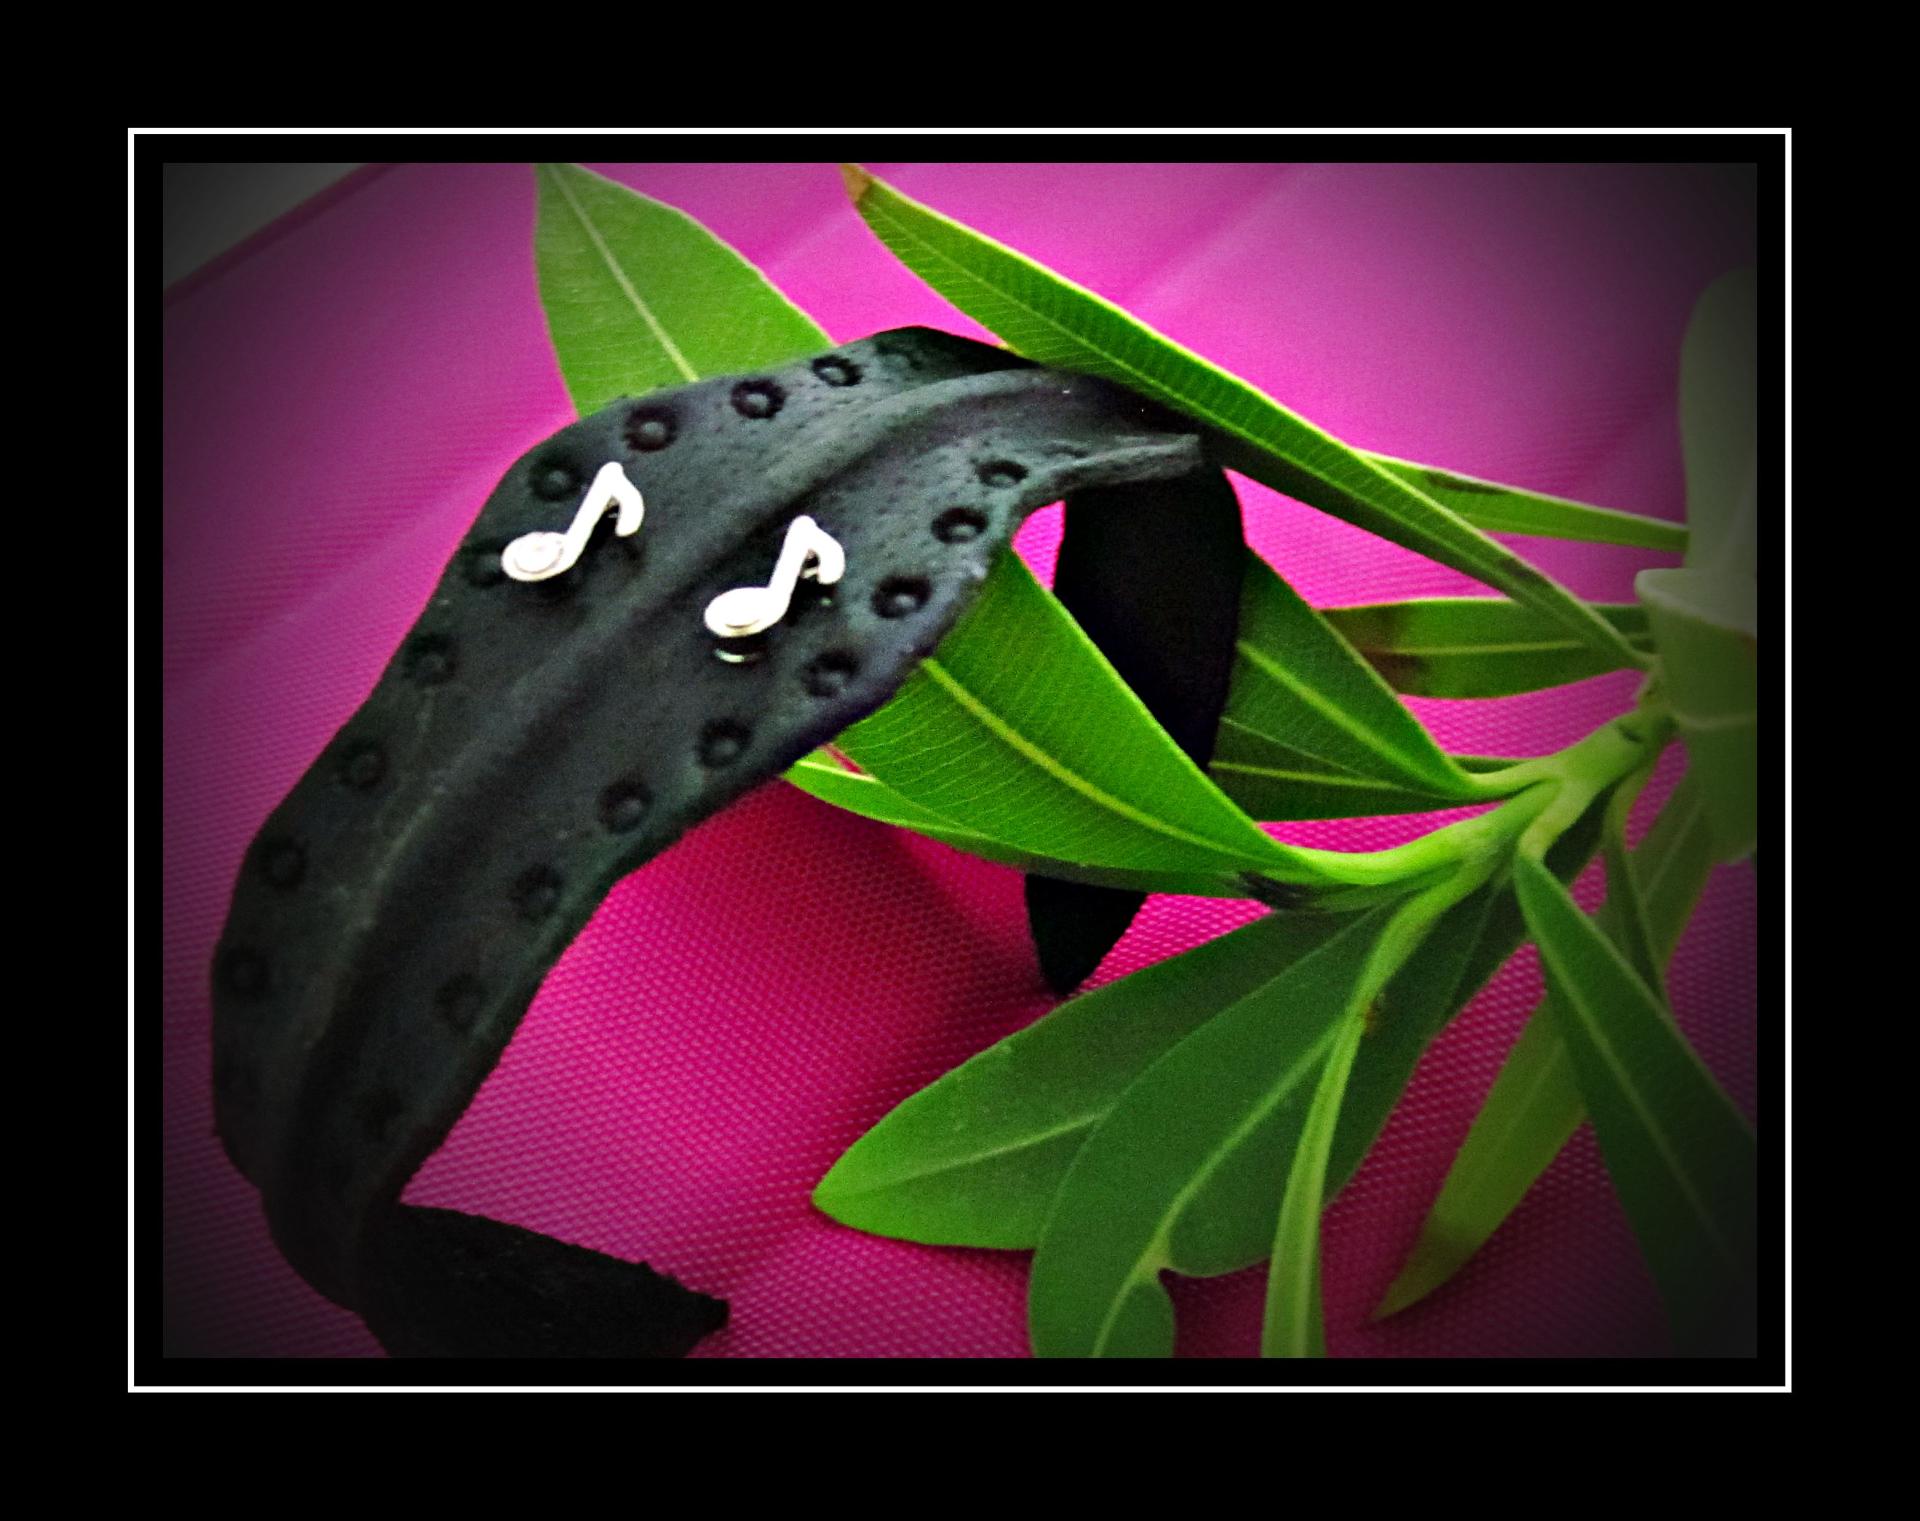 Leather Cuff Bangle With Music Notes - Genuine Black Leather